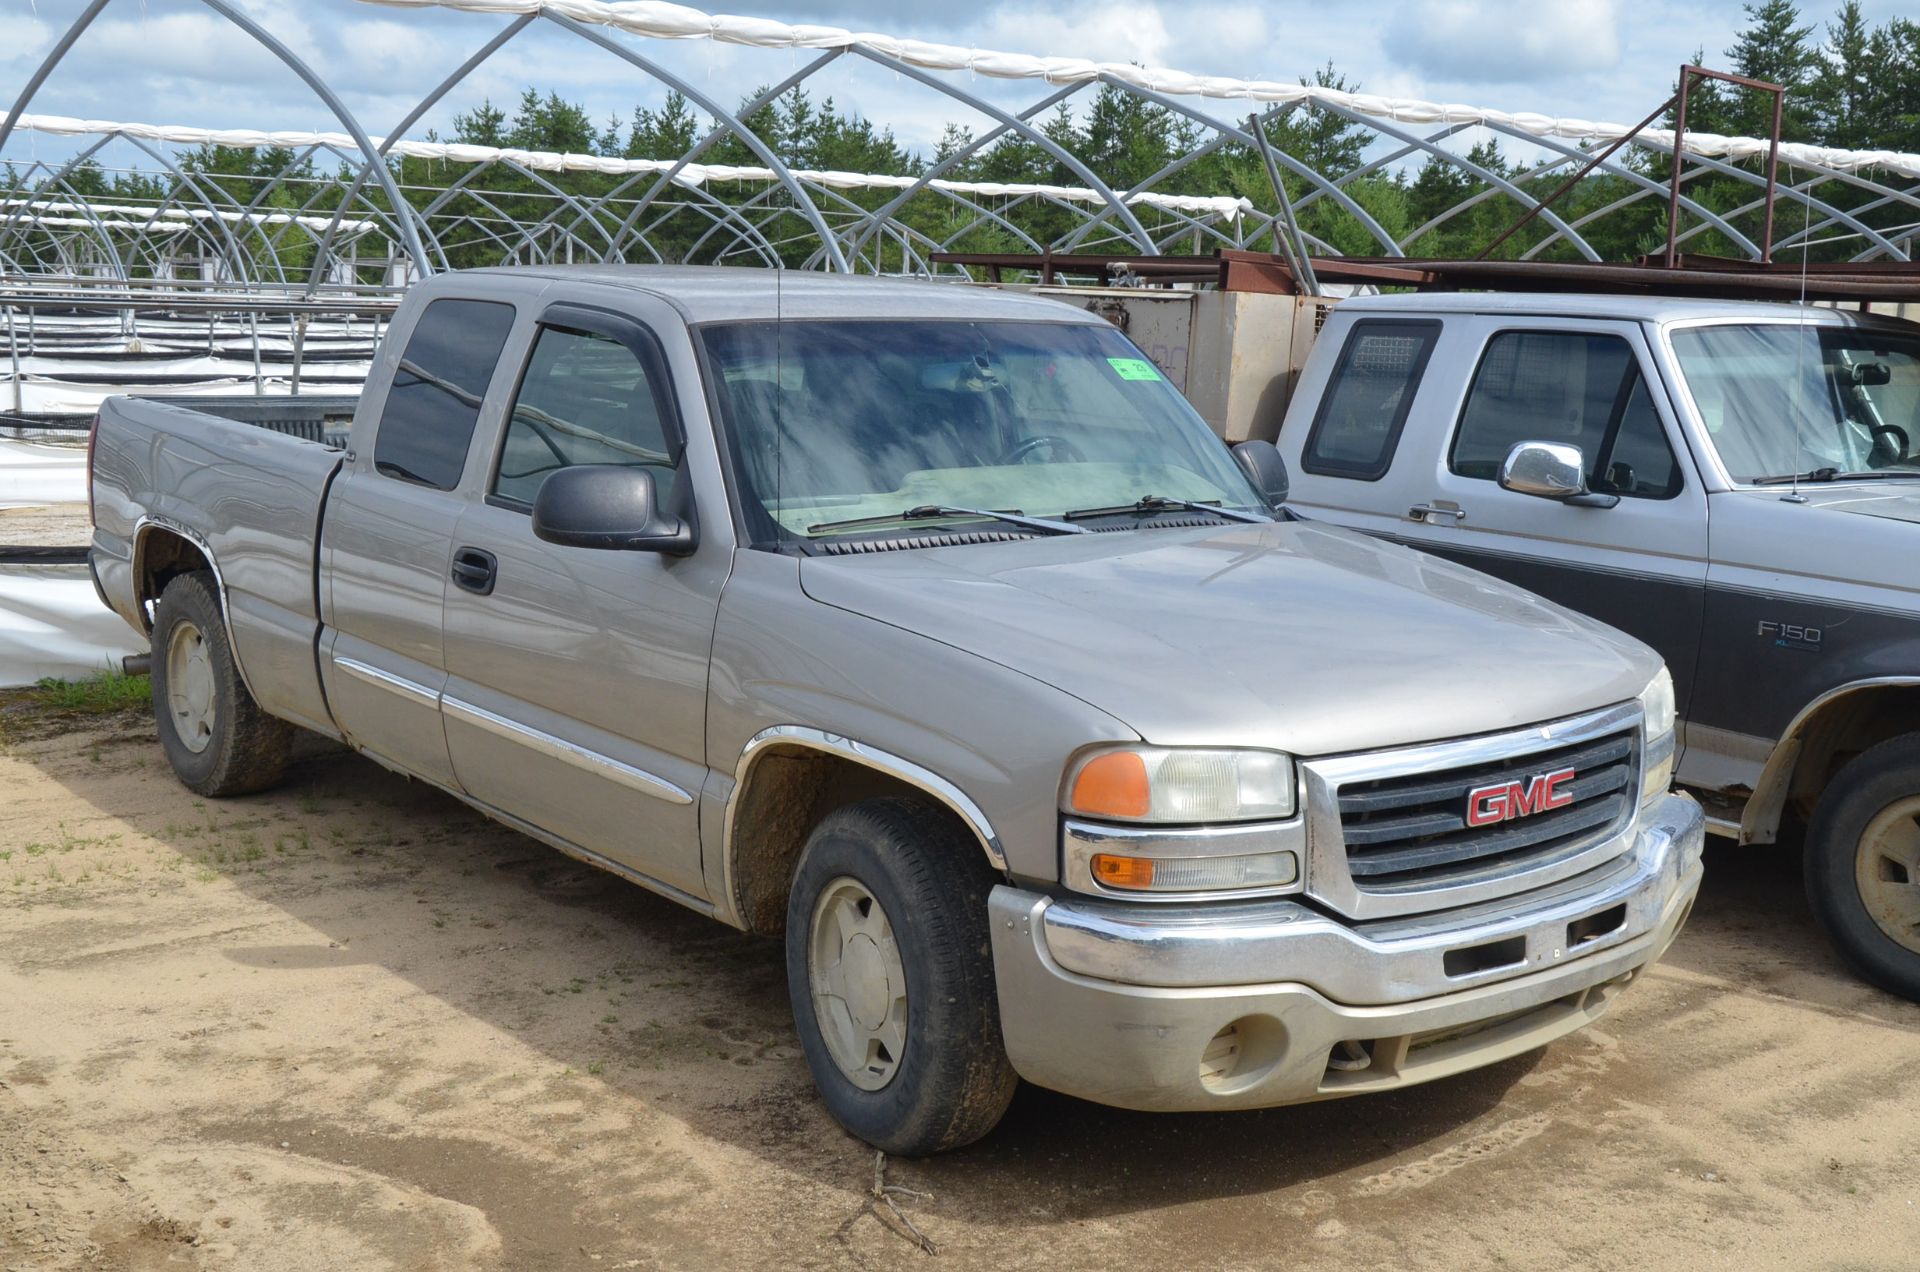 GMC (2003) SIERRA 1500 EXTENDED CAB PICKUP TRUCK WITH 4.8LITER GAS ENGINE, AUTO TRANSMISSION, REAR - Image 4 of 5